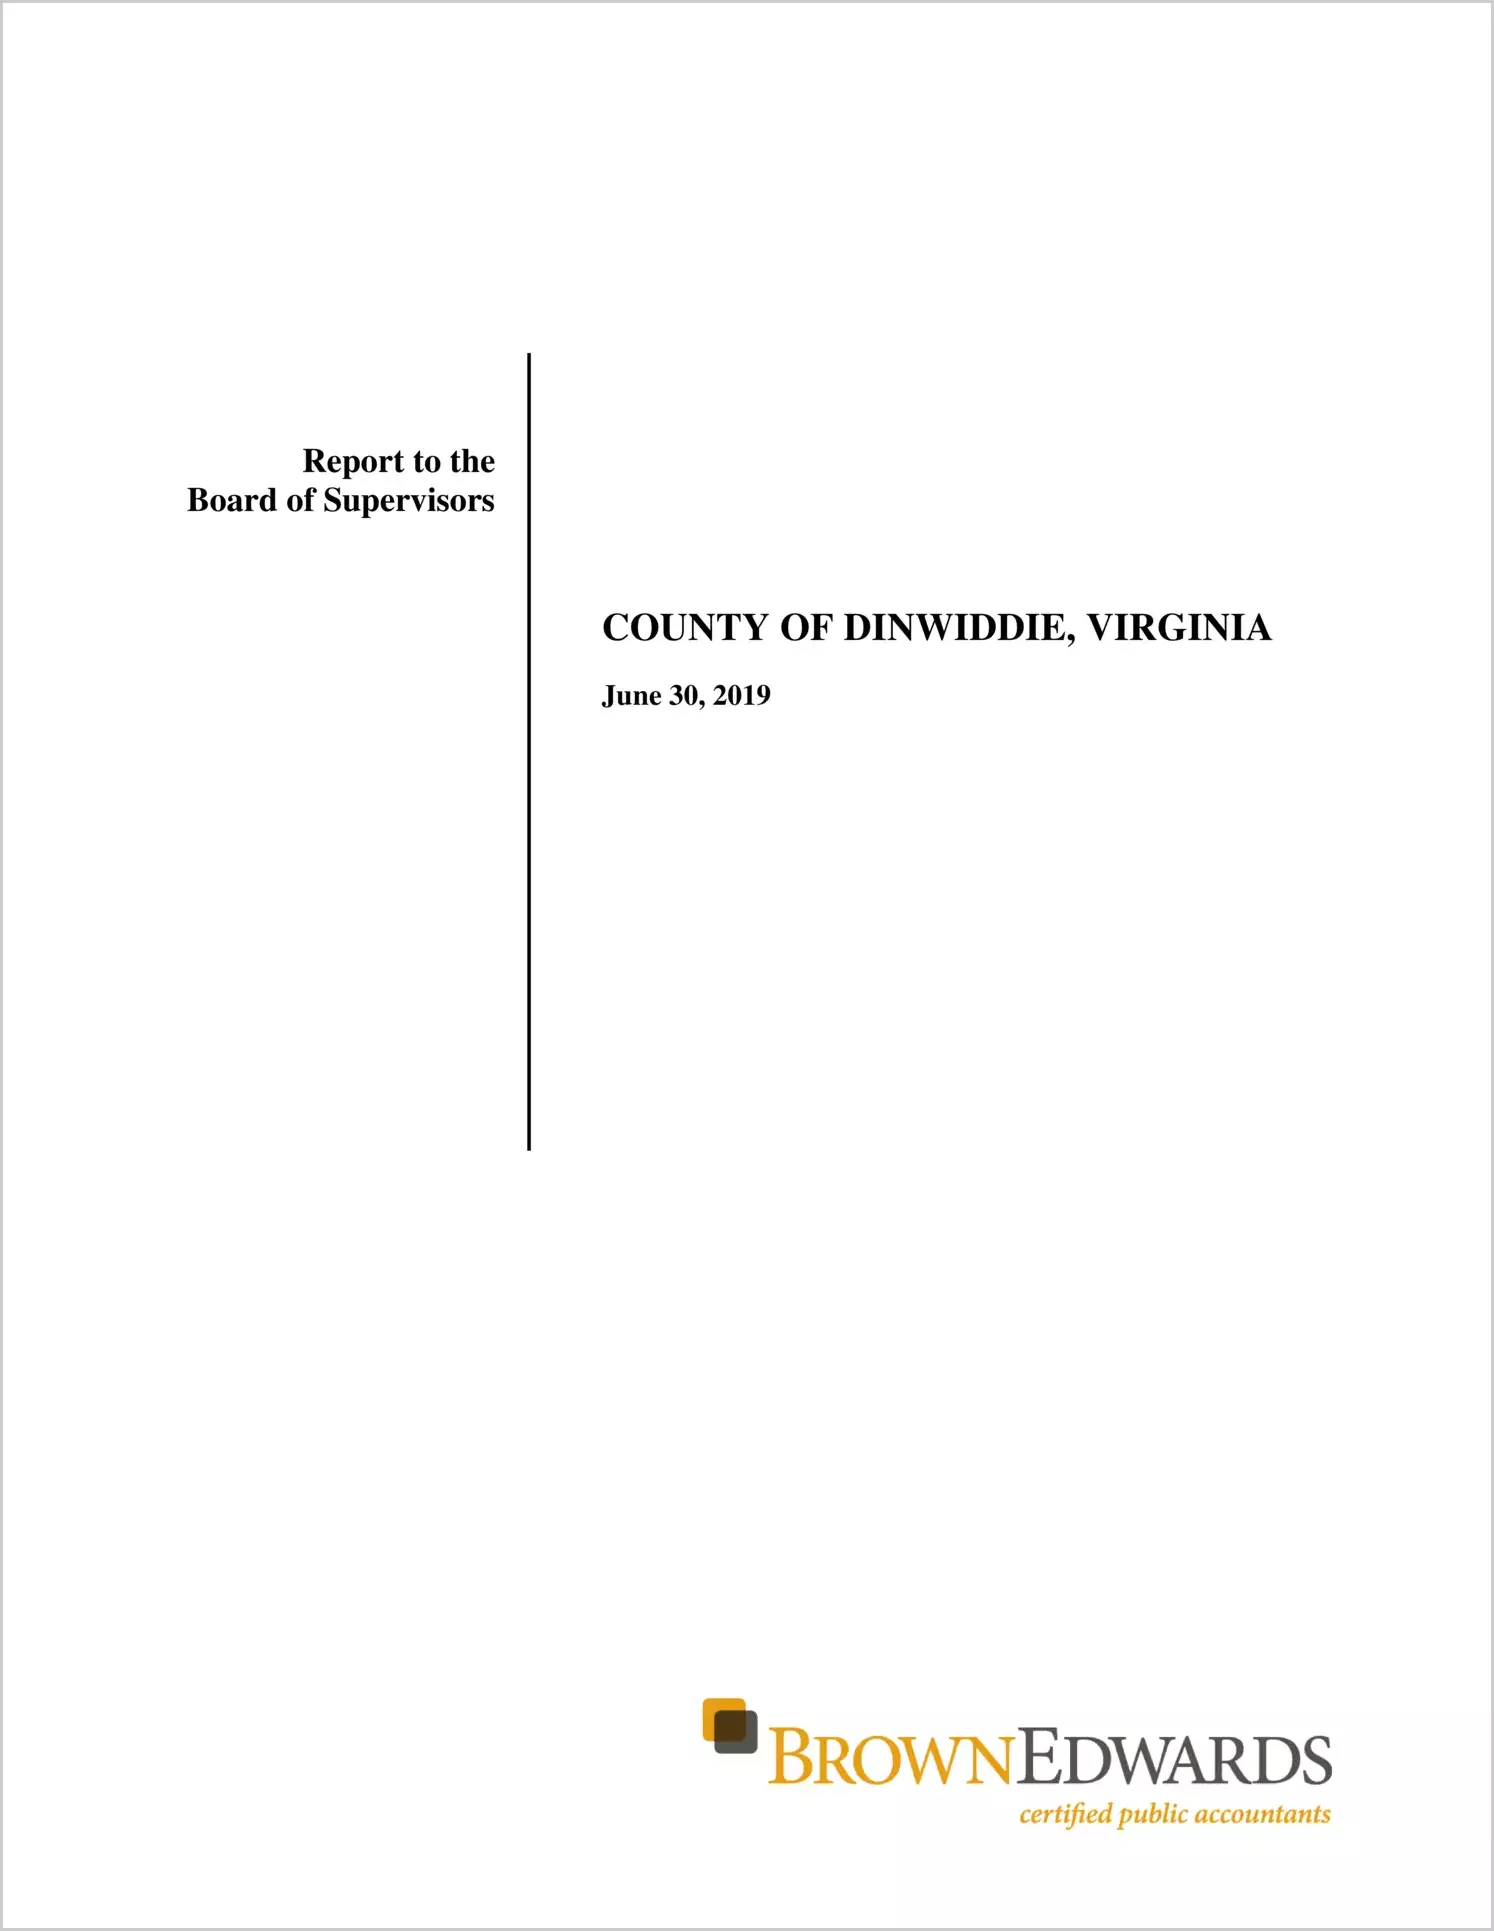 2019 Management Letter for County of Dinwiddie